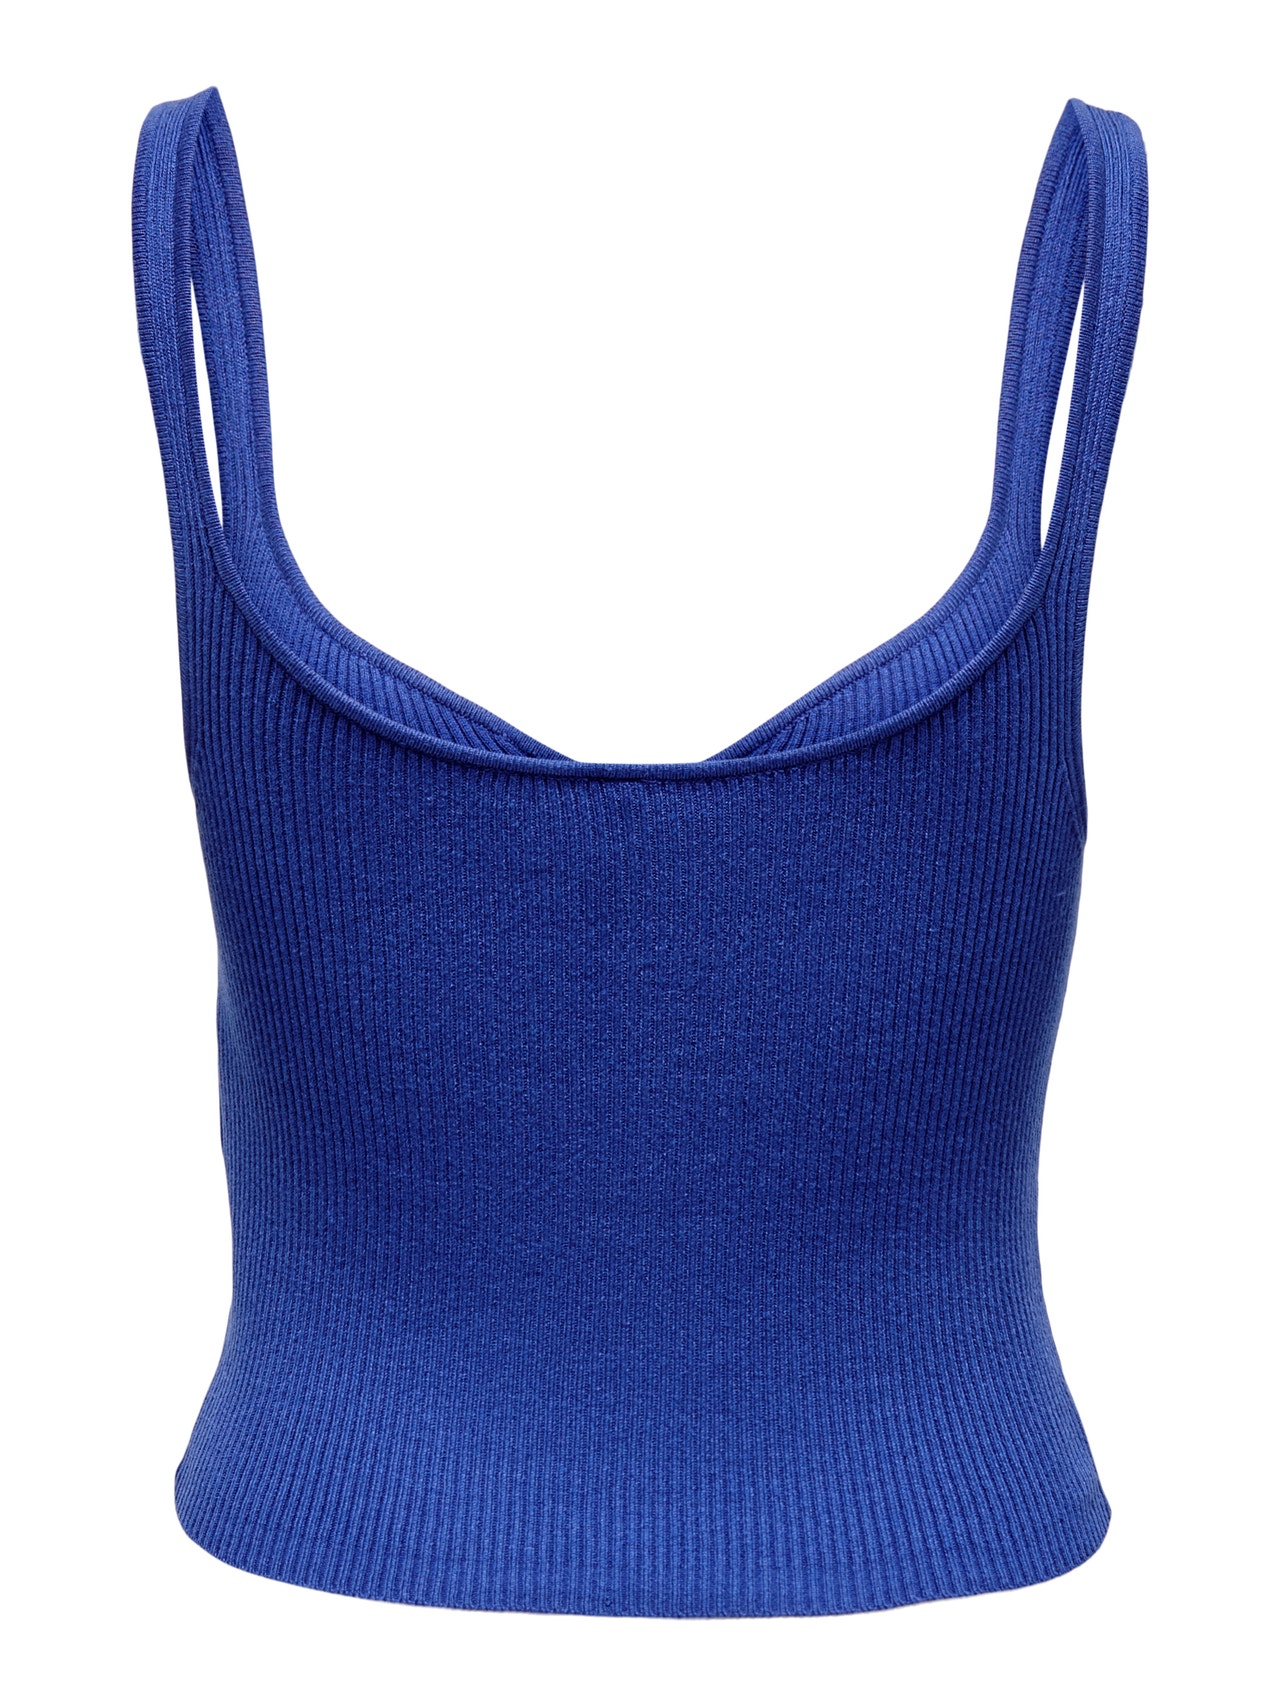 ONLY Square neck Pullover -Dazzling Blue - 15288496